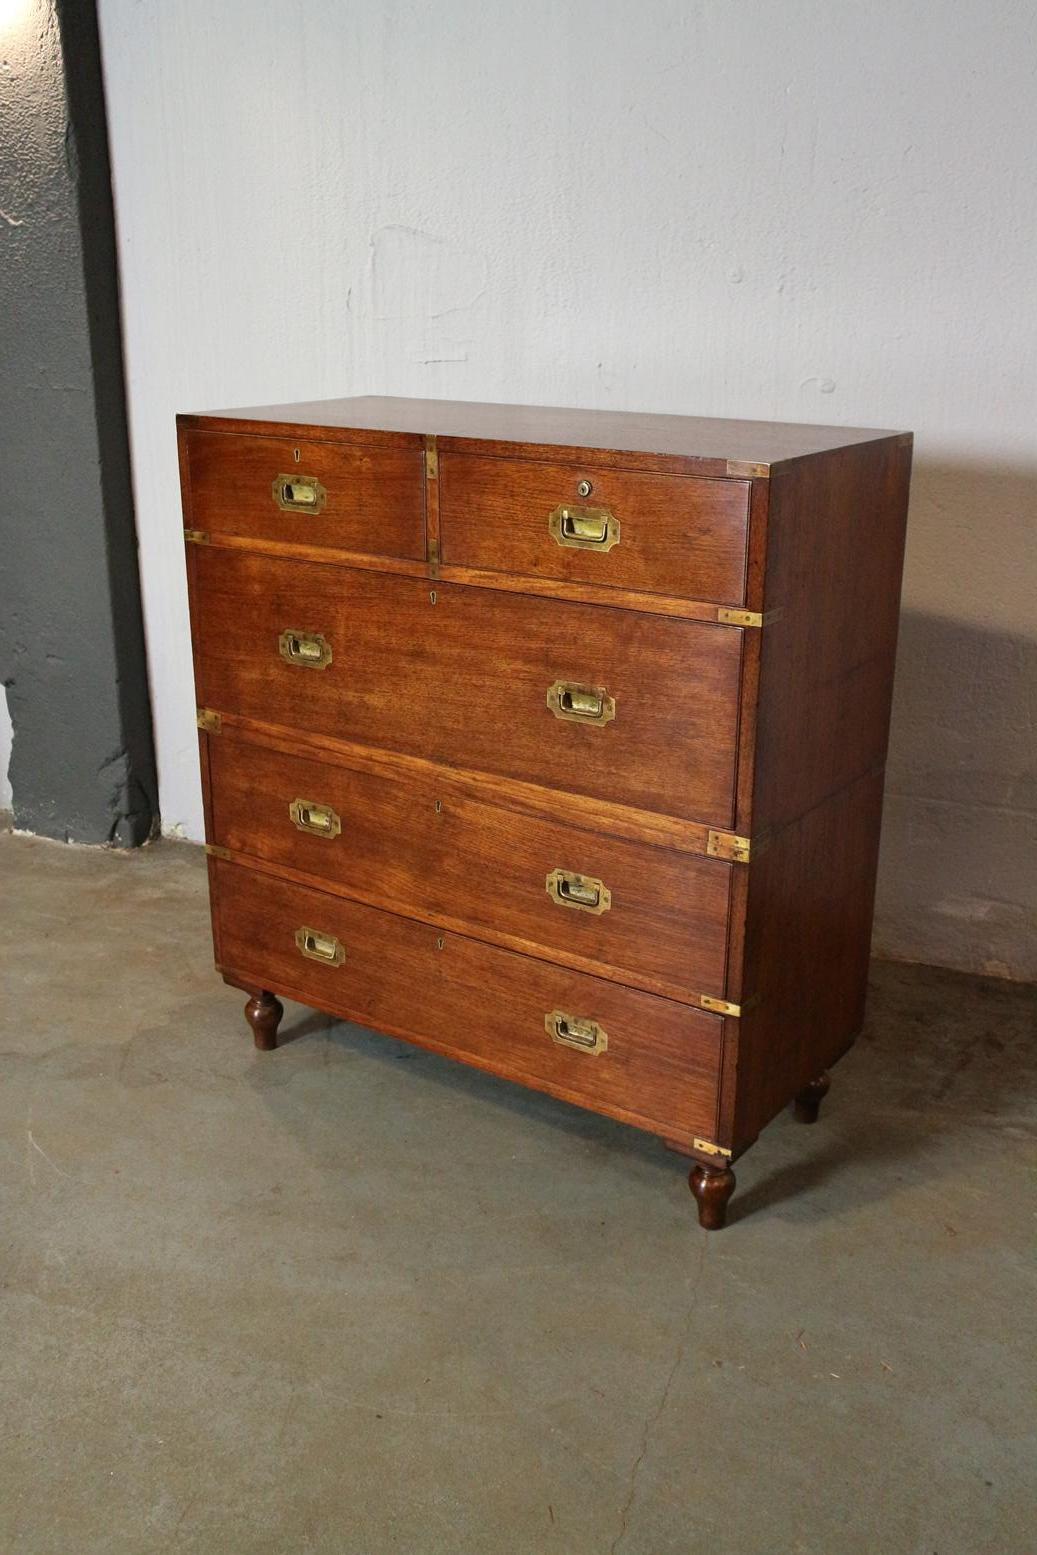 Antique teak campaign chest of drawers from the Victorian era. Nice warm color. Consisting of 2 parts. The cabinet is fitted with flush drawer pullers, brass corners and removable feet. All this to make transport easy and to protect against